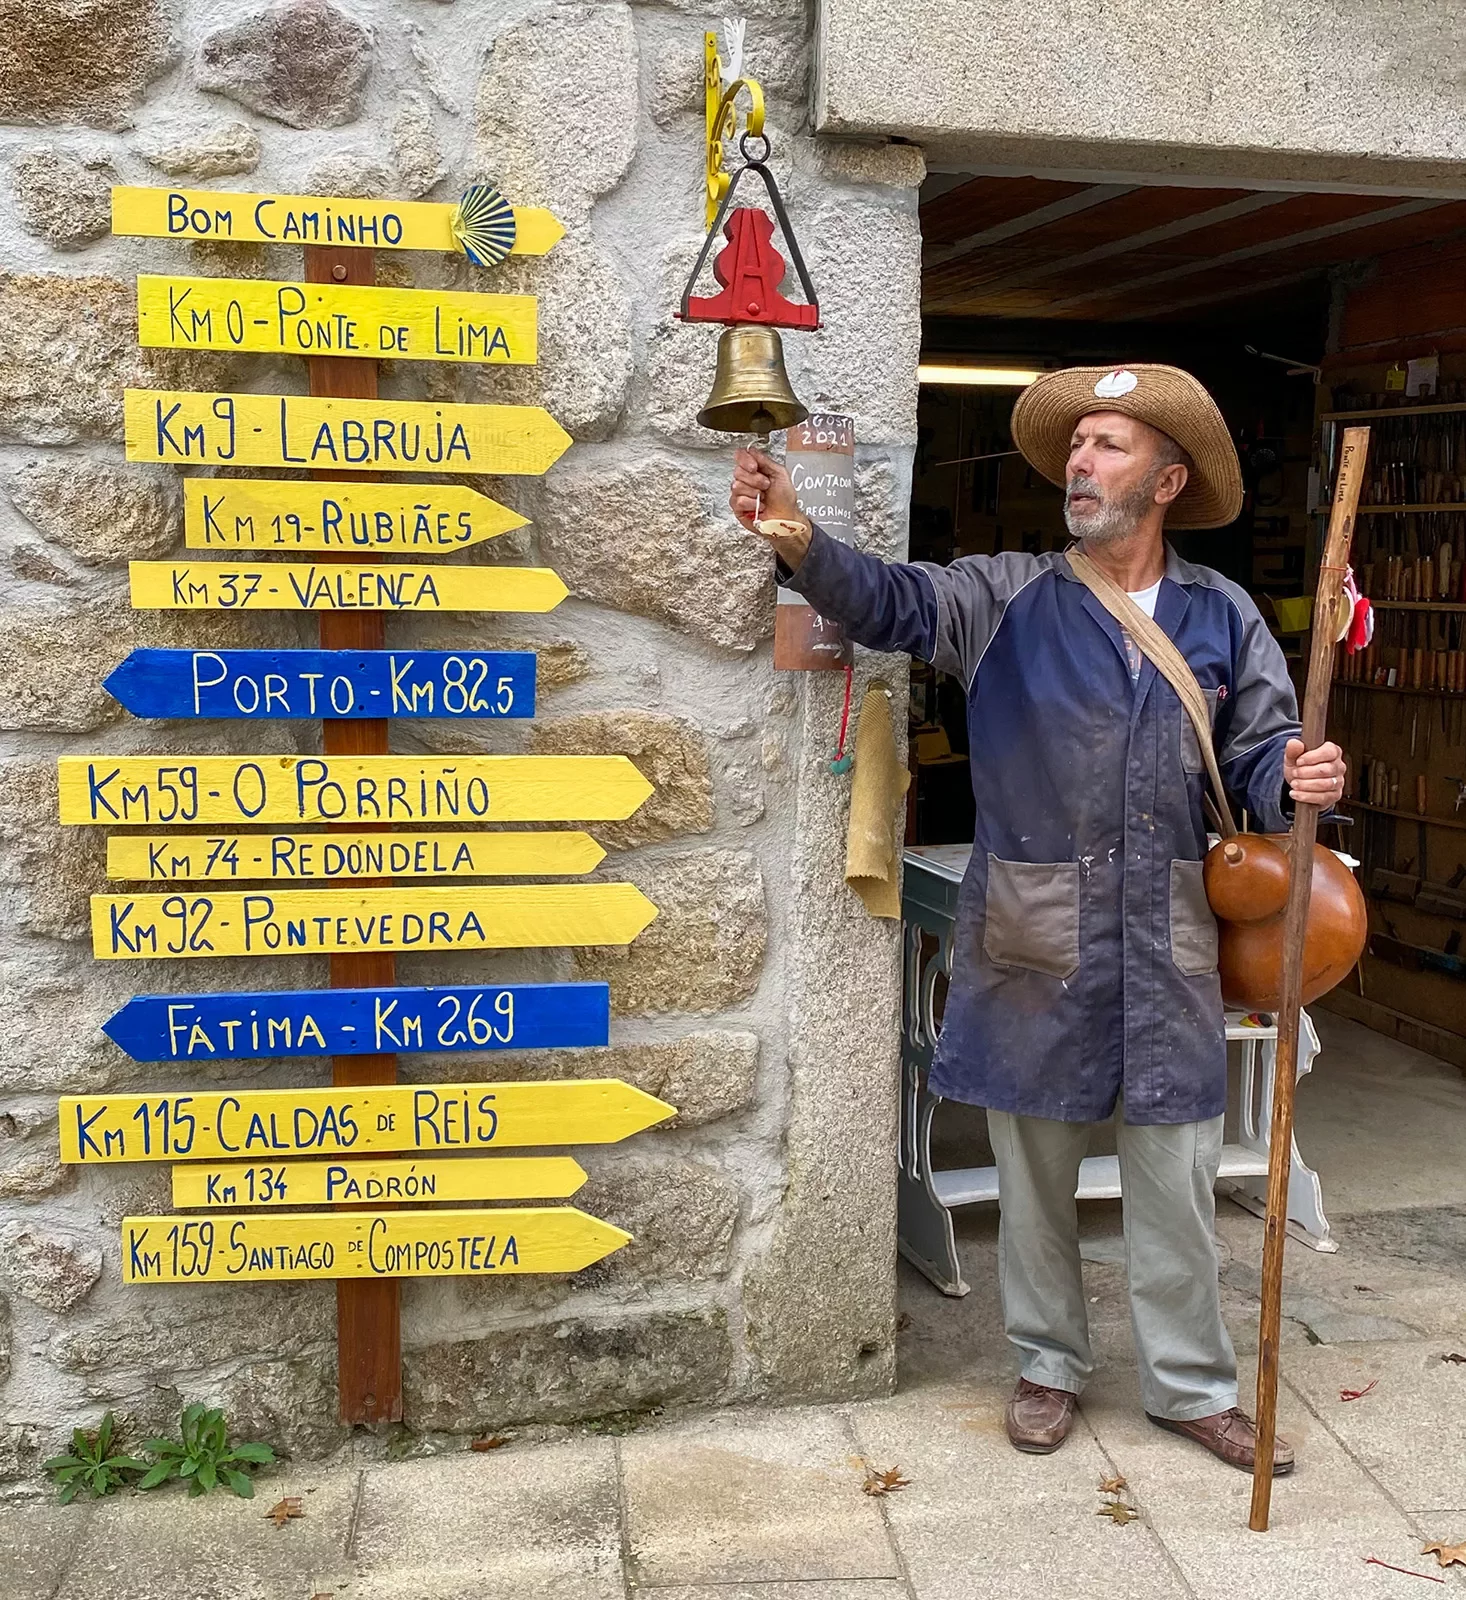 Local in hiking gear ringing bell, assortment of direction signs to his right.